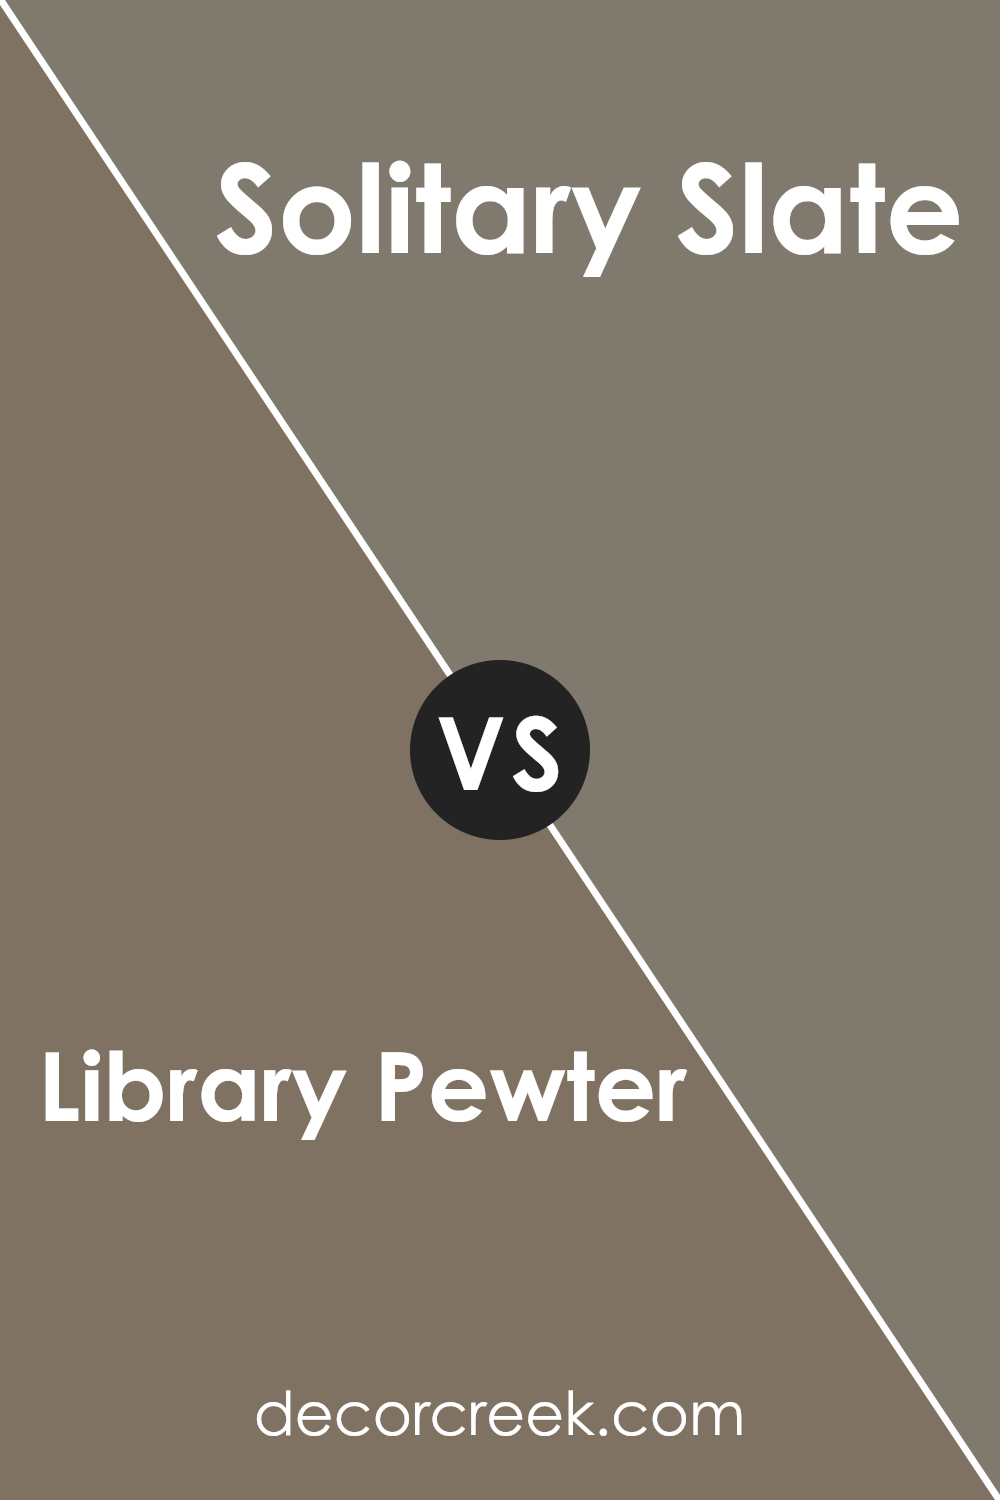 library_pewter_sw_0038_vs_solitary_slate_sw_9598